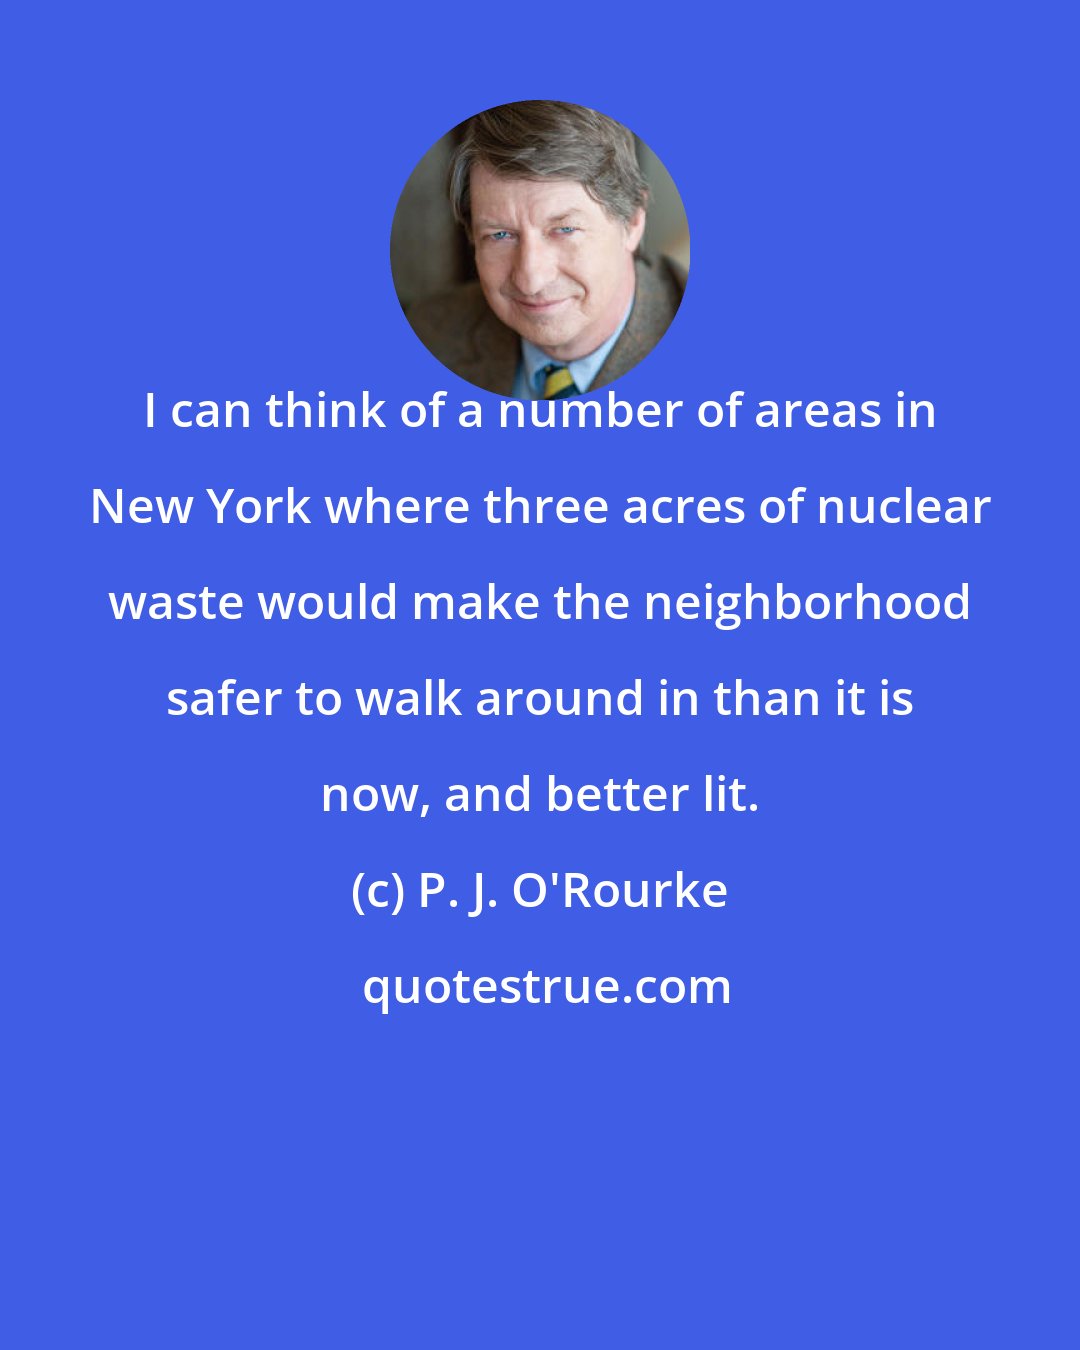 P. J. O'Rourke: I can think of a number of areas in New York where three acres of nuclear waste would make the neighborhood safer to walk around in than it is now, and better lit.